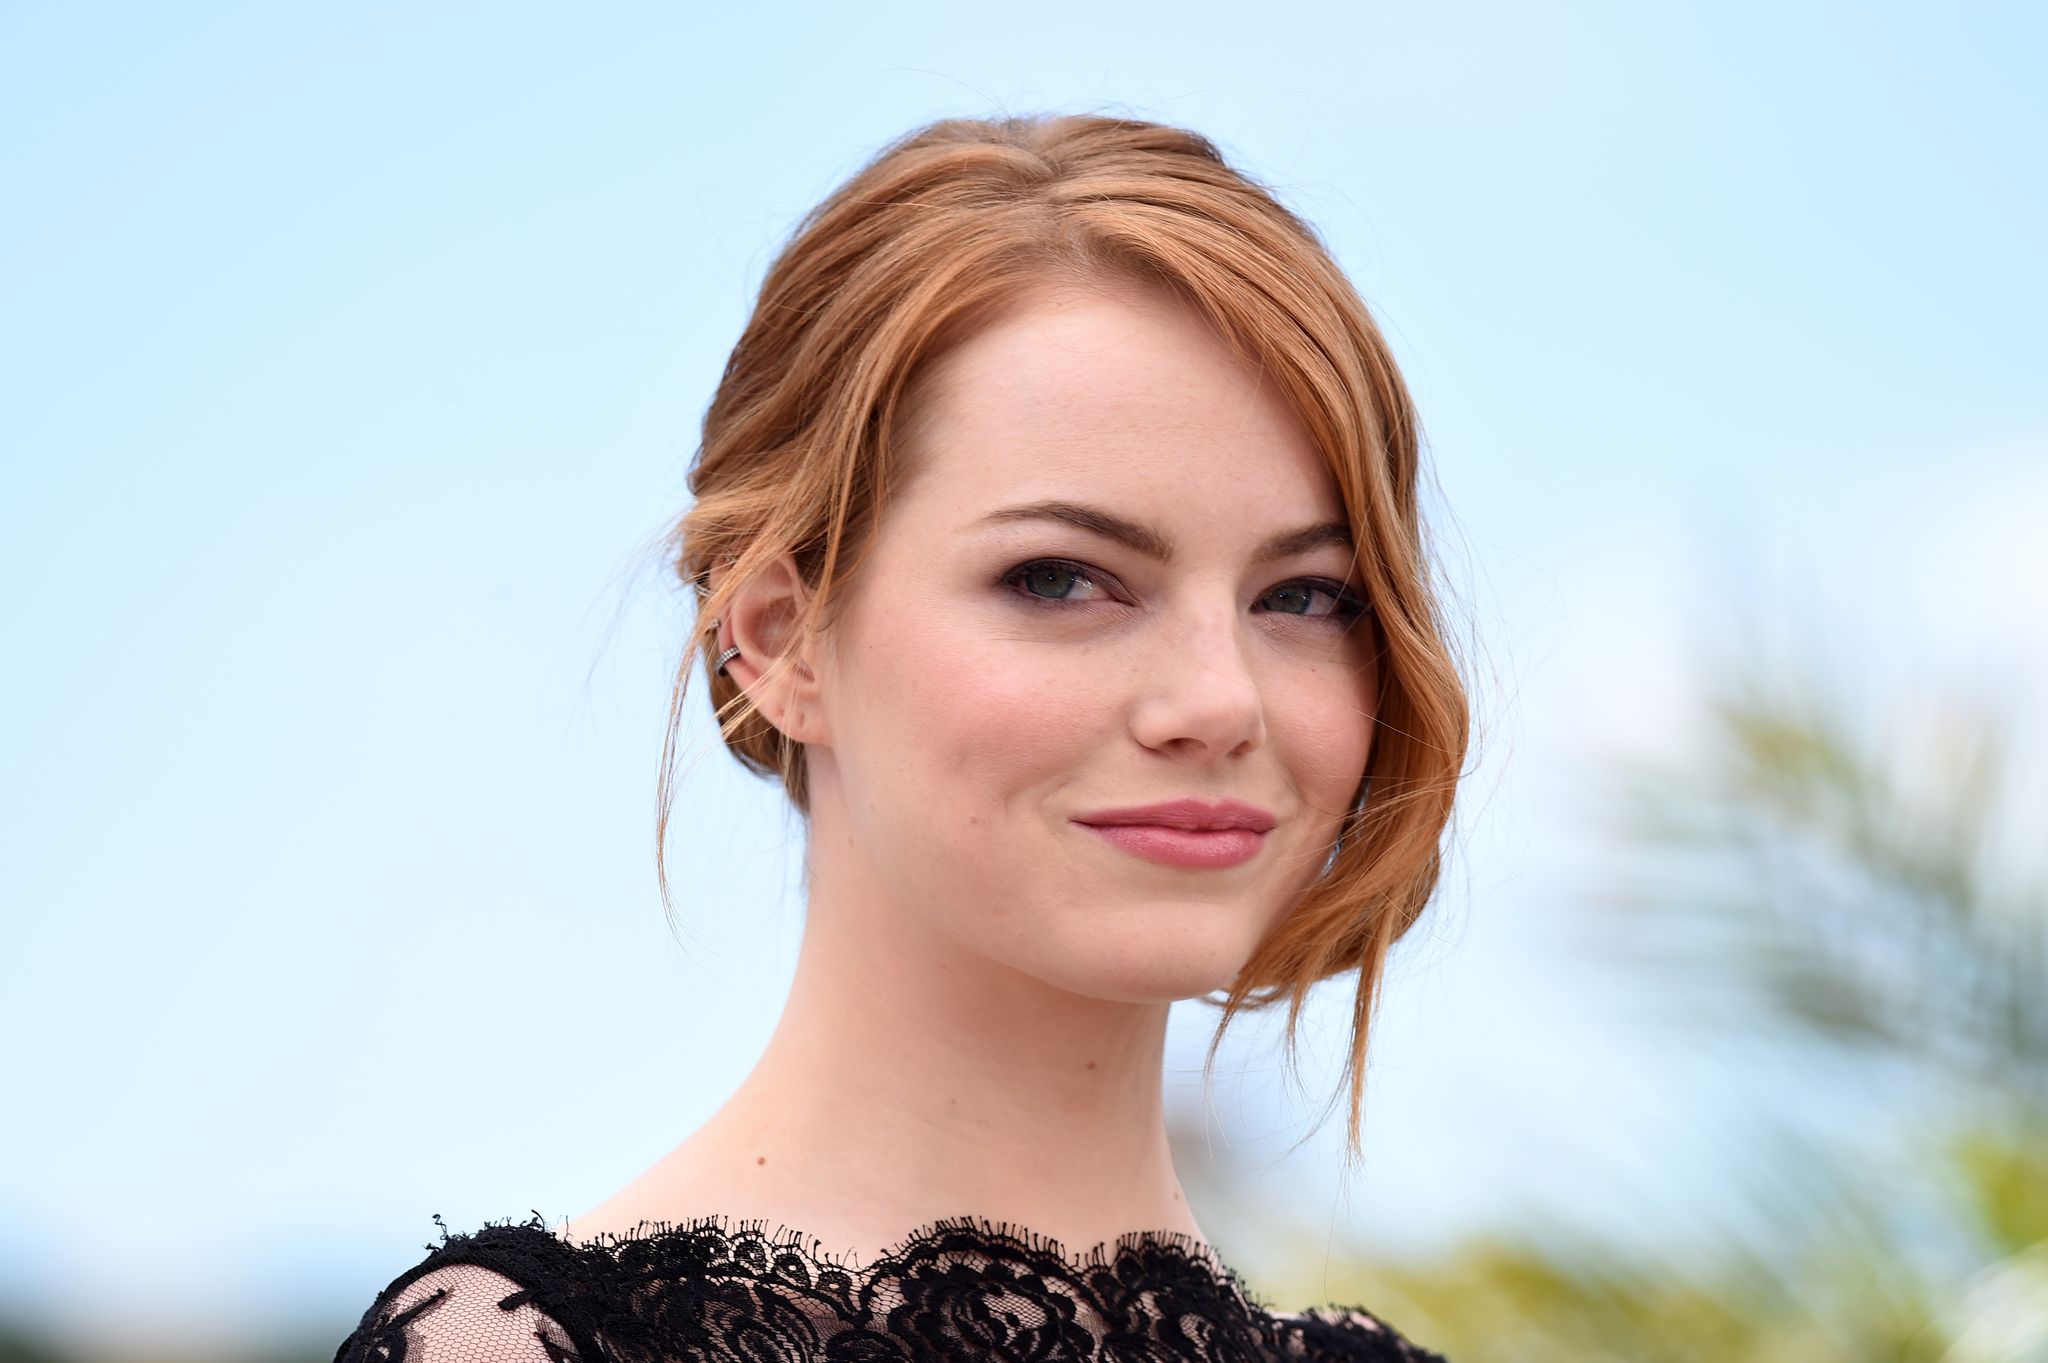 cannes, france   may 15  actress emma stone attends a photocall for irrational man during the 68th annual cannes film festival on may 15, 2015 in cannes, france  photo by ben a pruchniegetty images